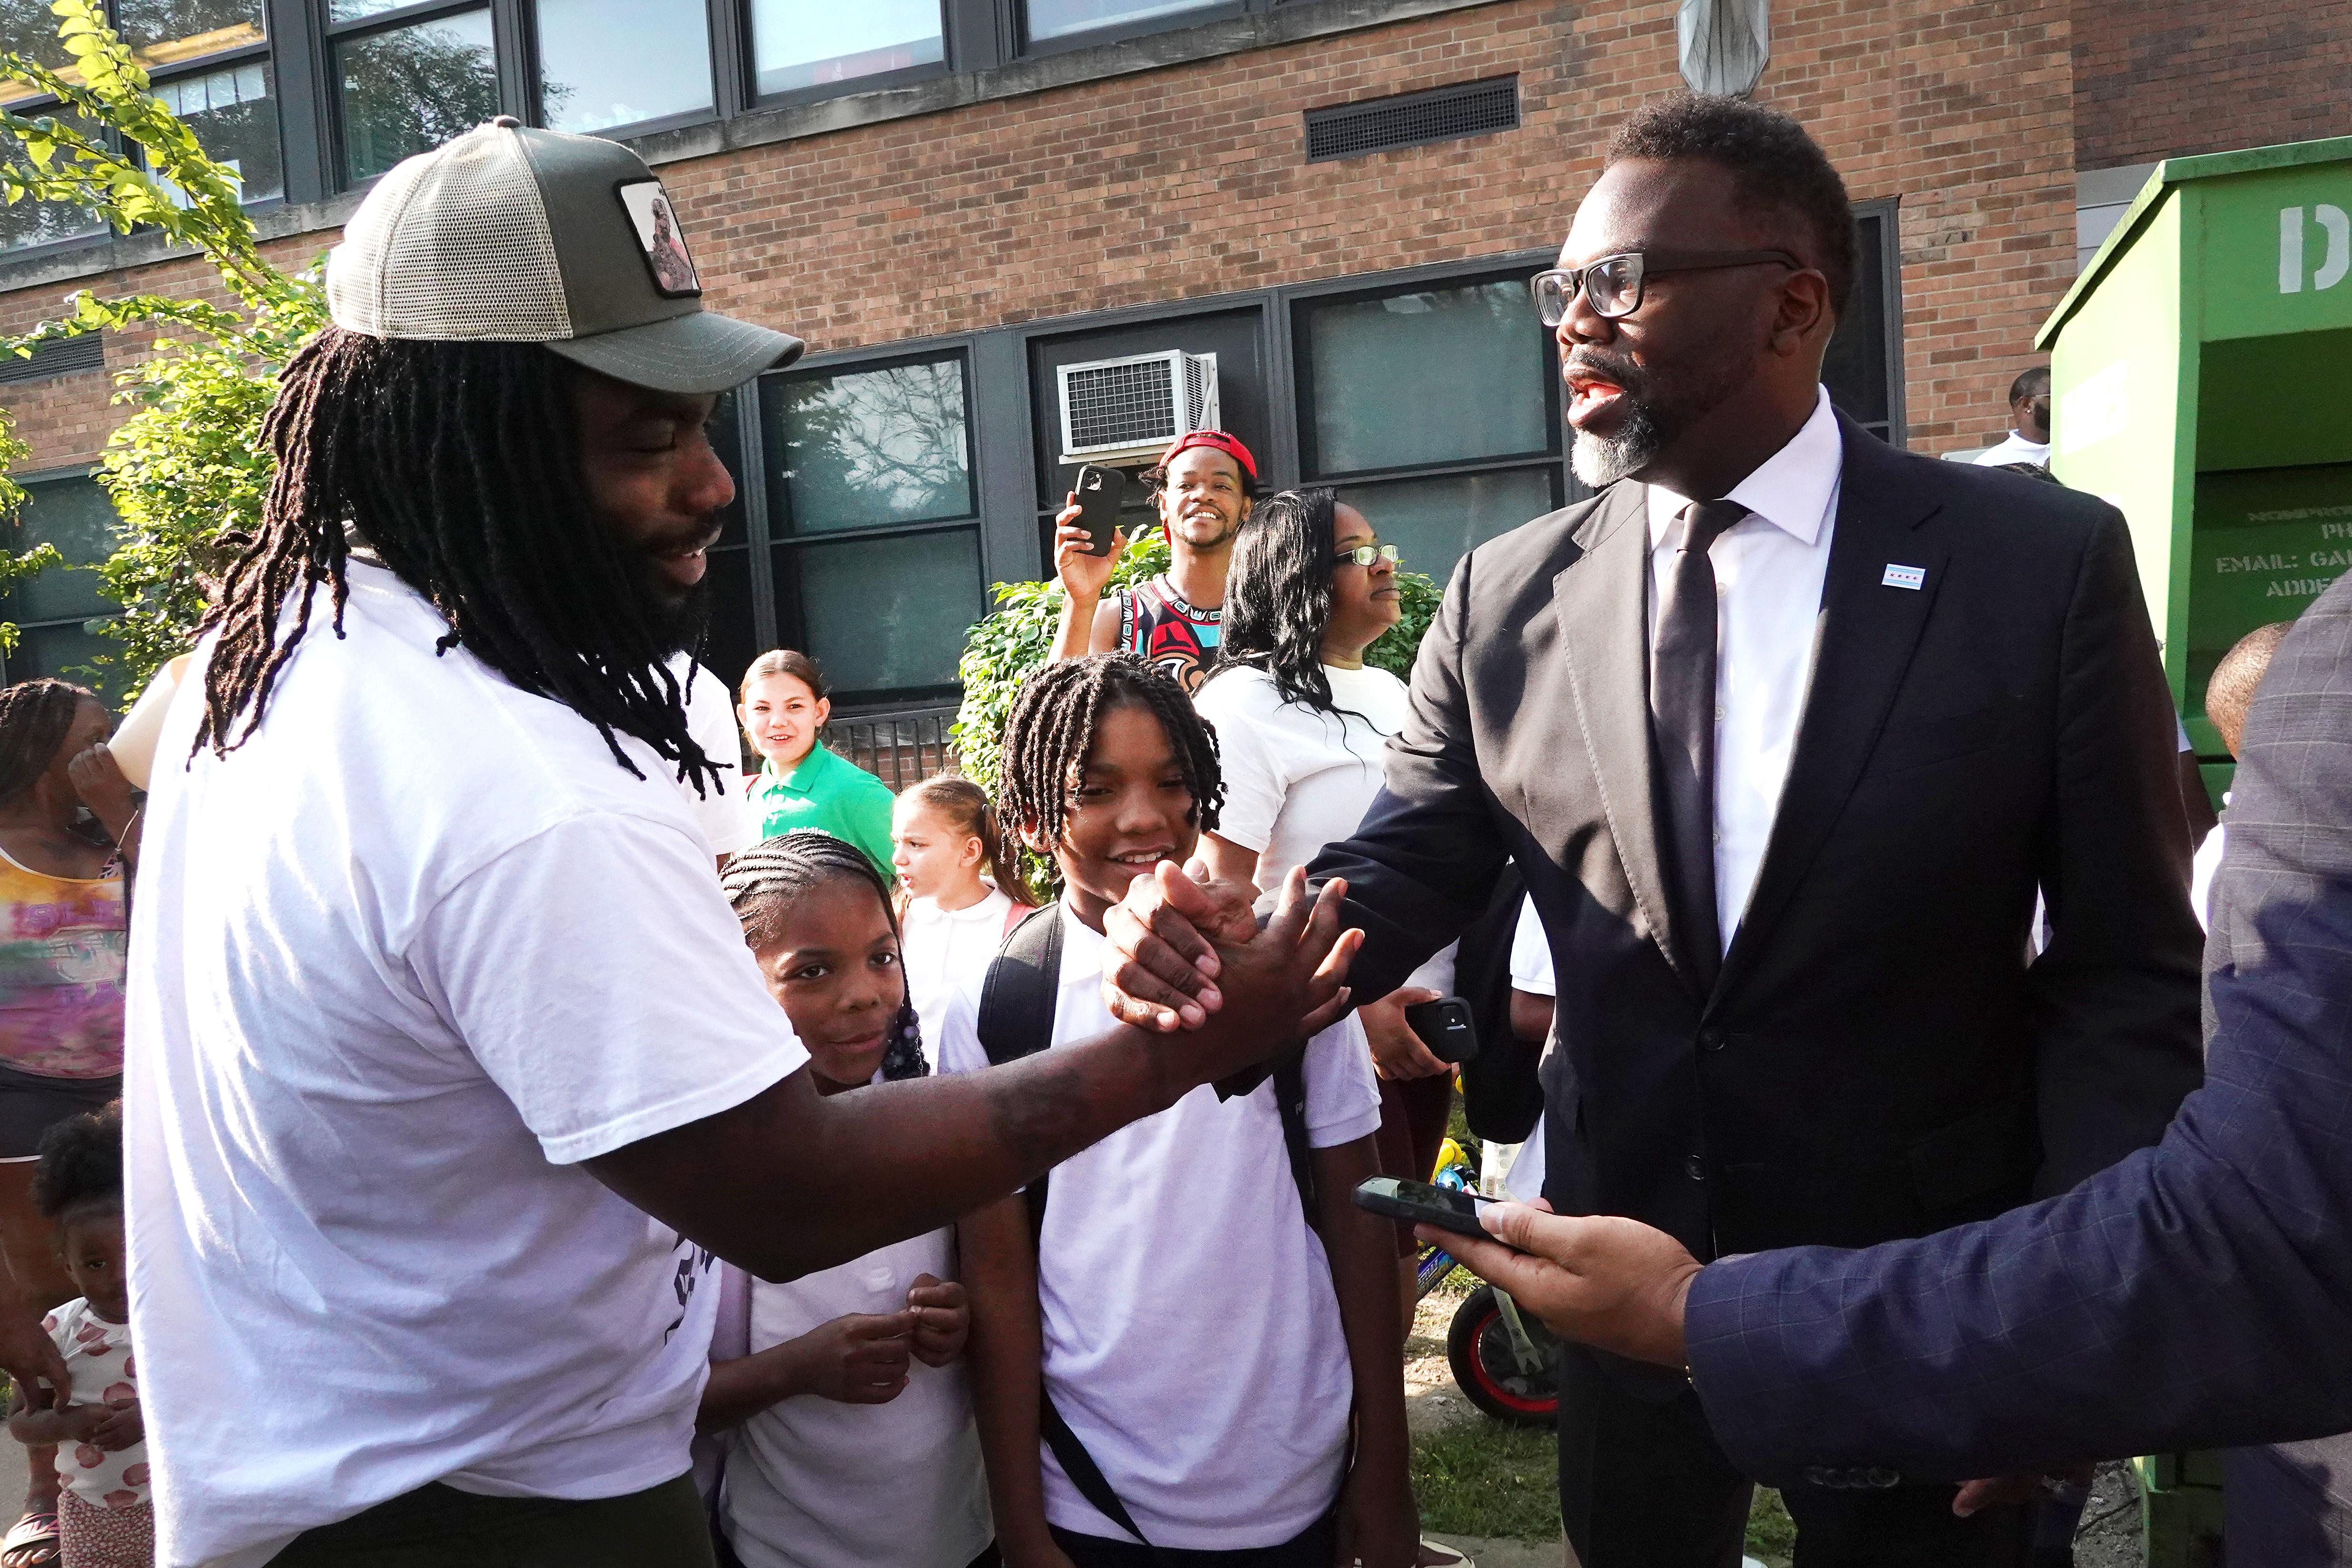 Brandon Johnson shakes hands with a man outside an elementary school amid a crowd of kids and parents.